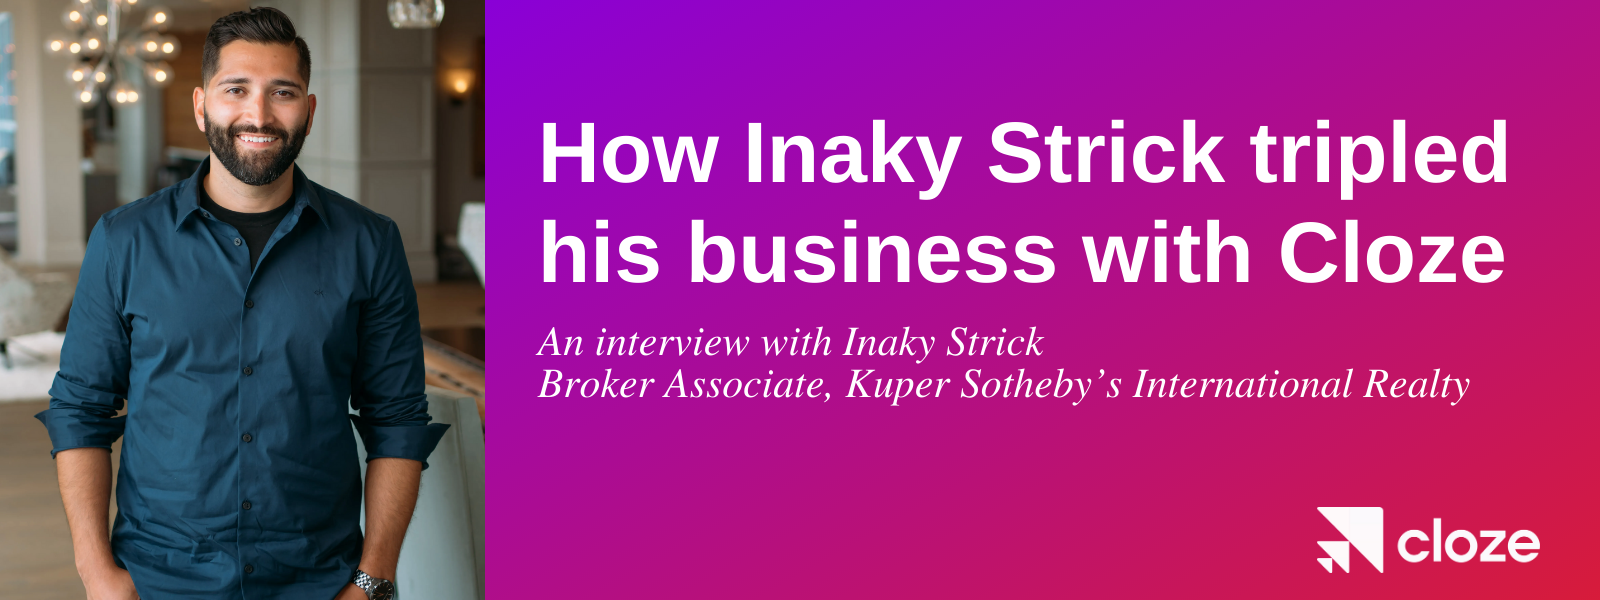 How Inaky Strick tripled his business with Cloze